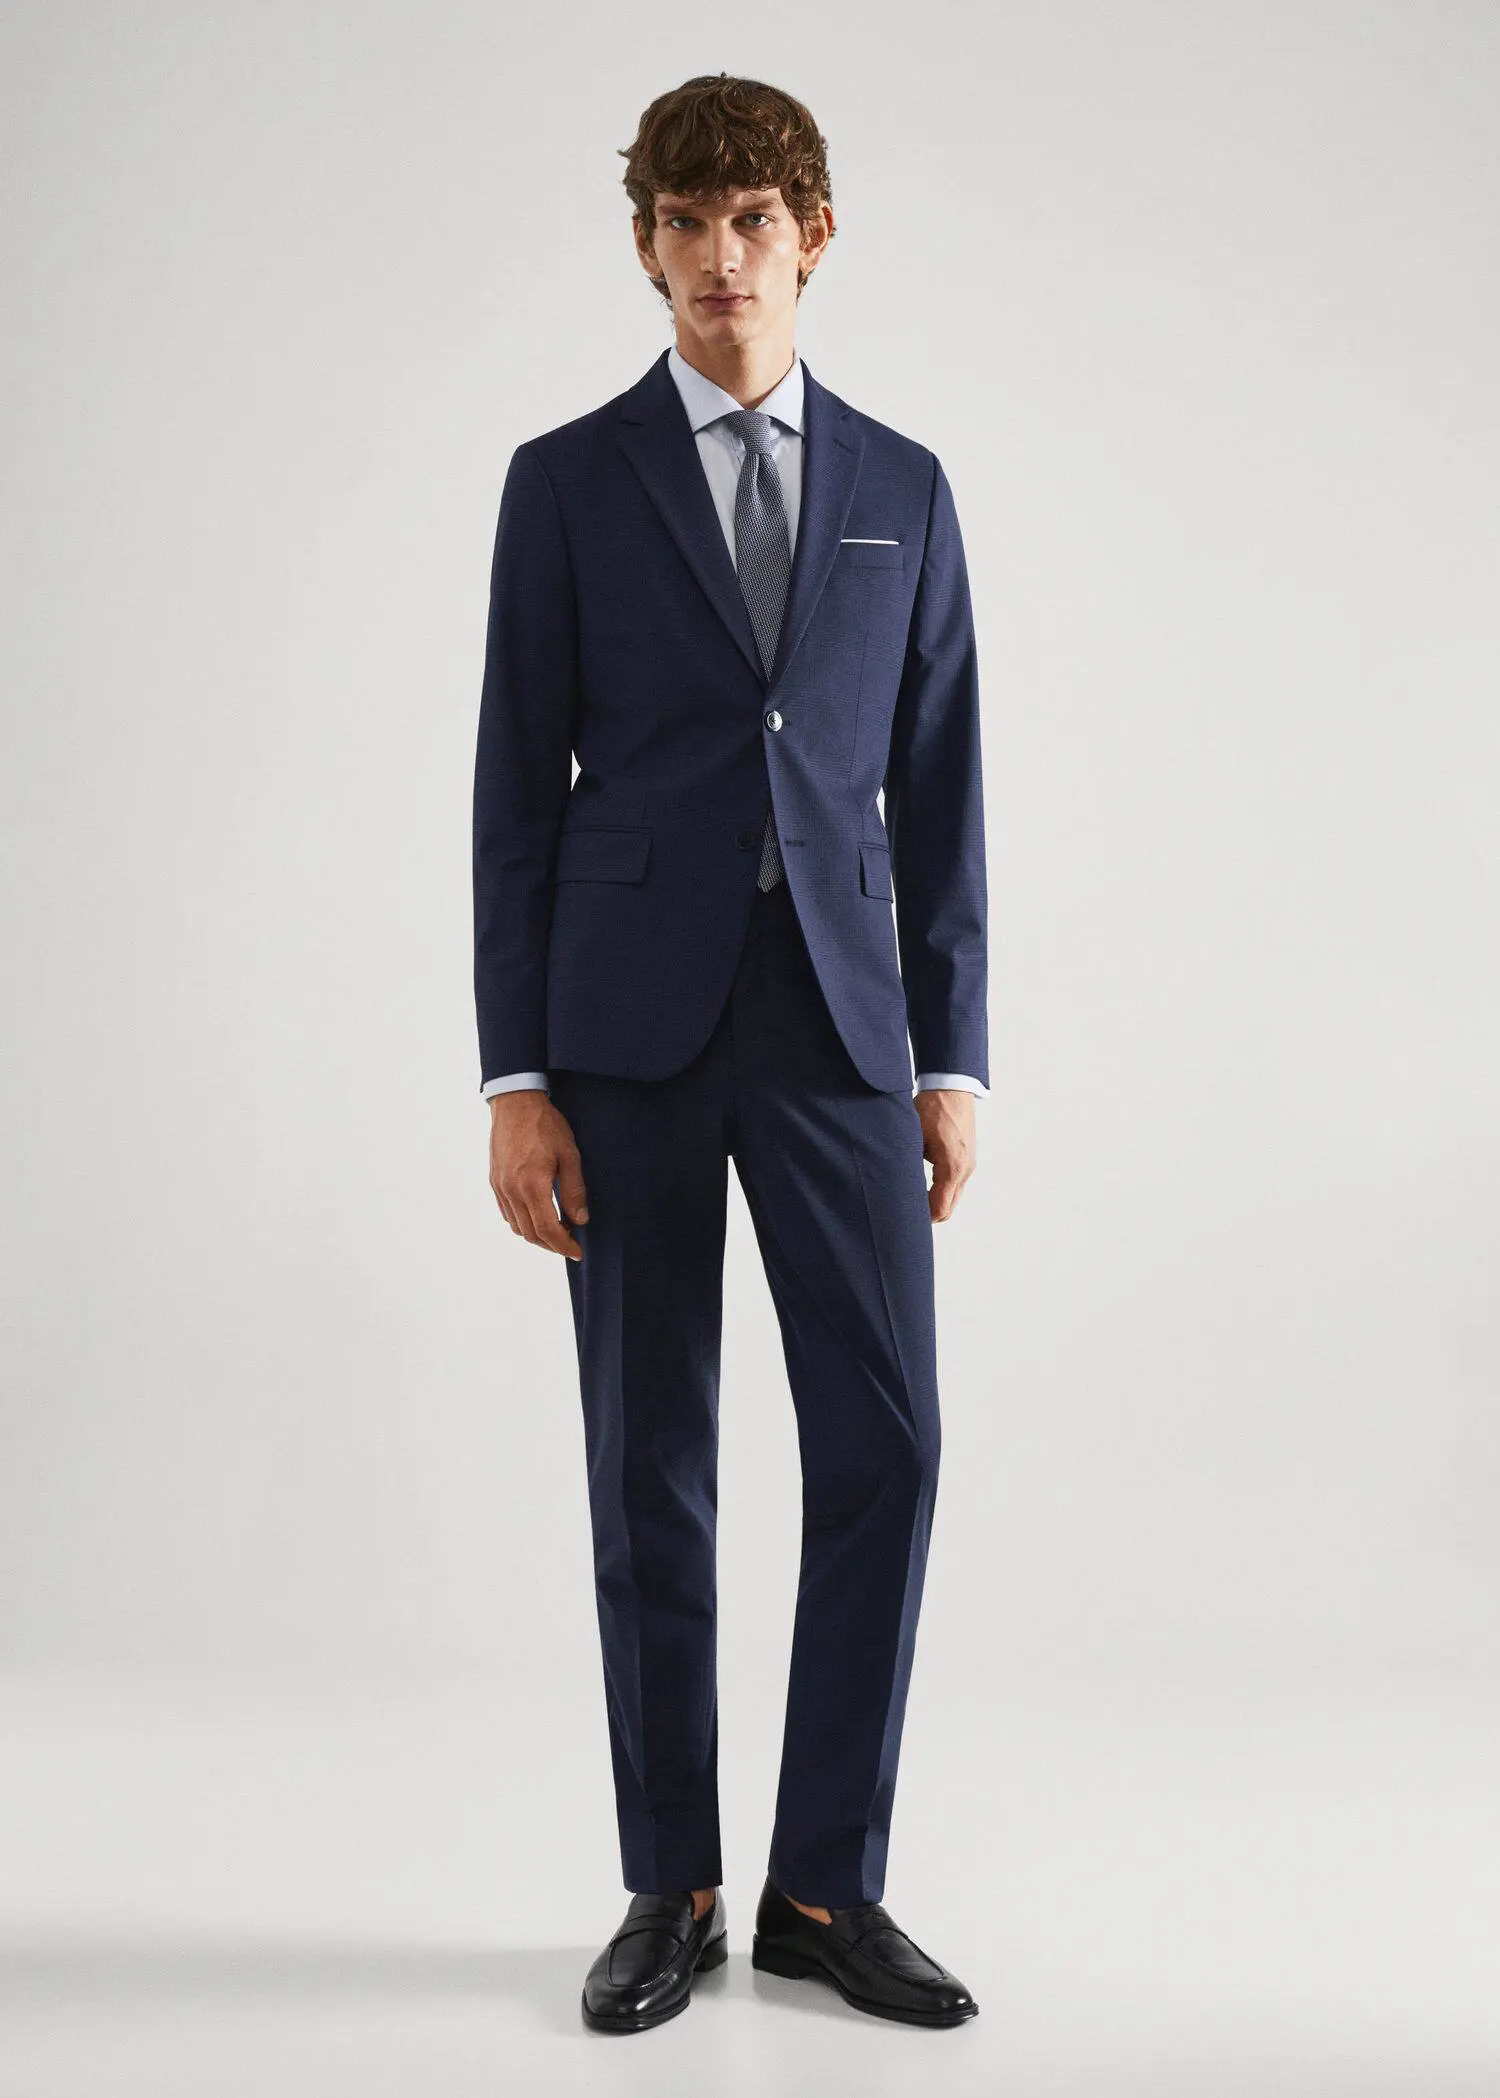 Mango Slim-fit check wool suit jacket. a man wearing a suit and tie standing in a room. 